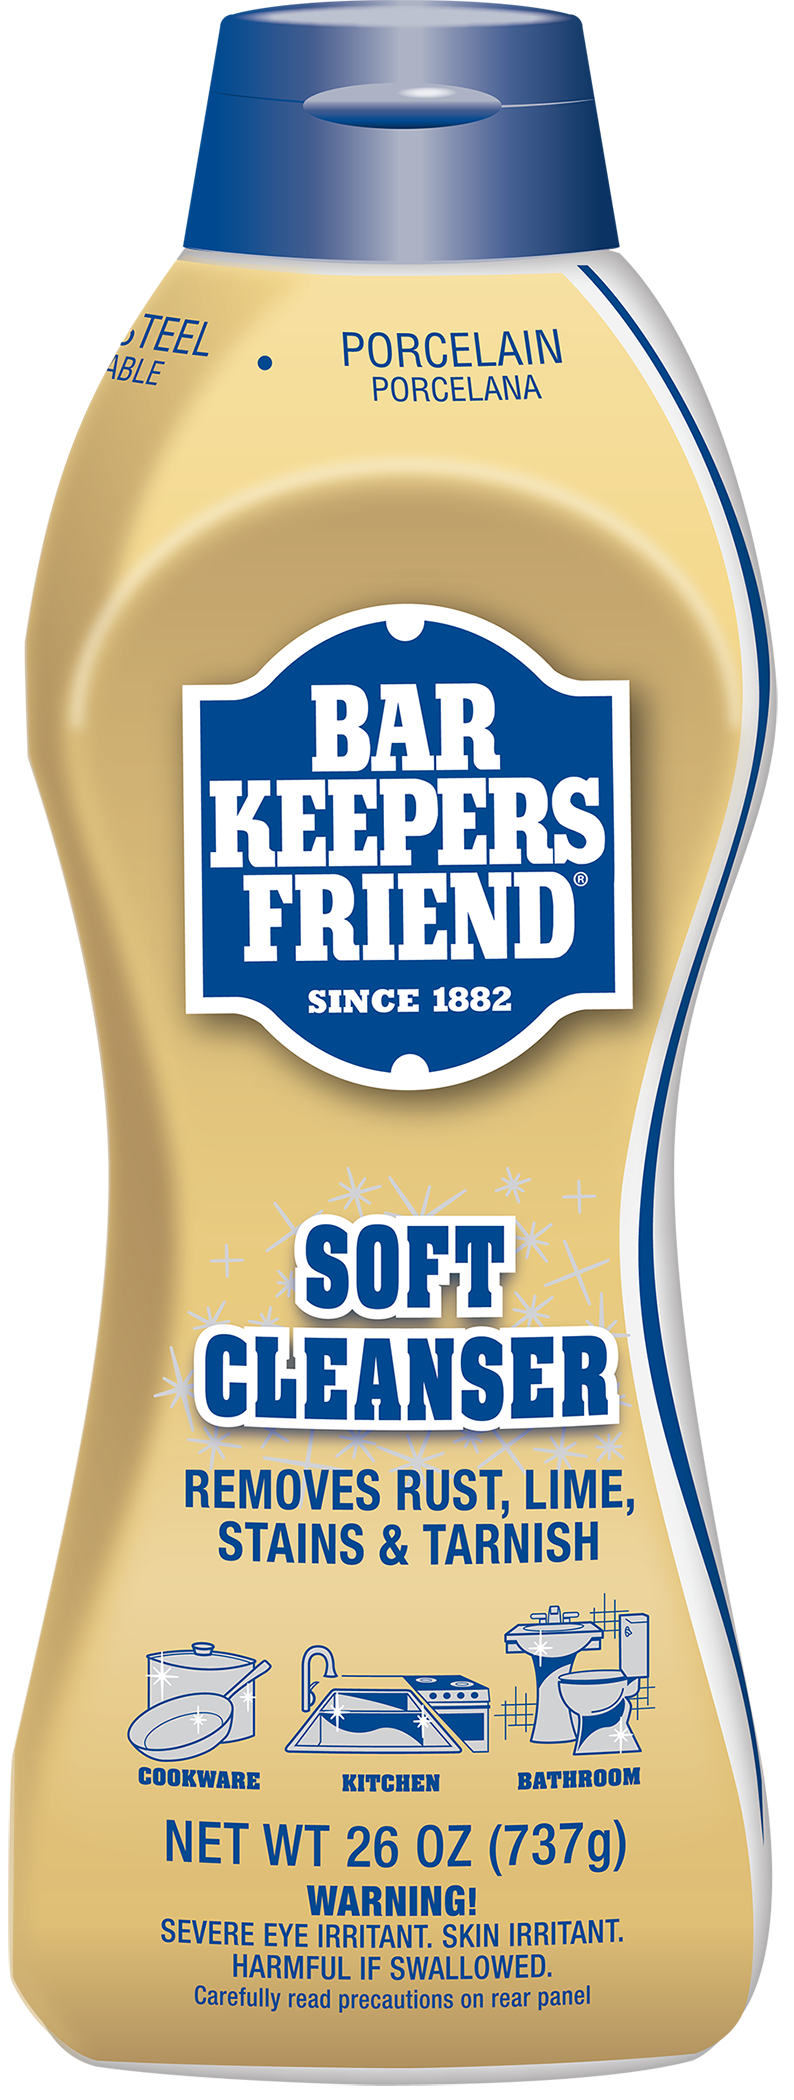 Bar Keeper's Friend house cleanser review - Reviewed